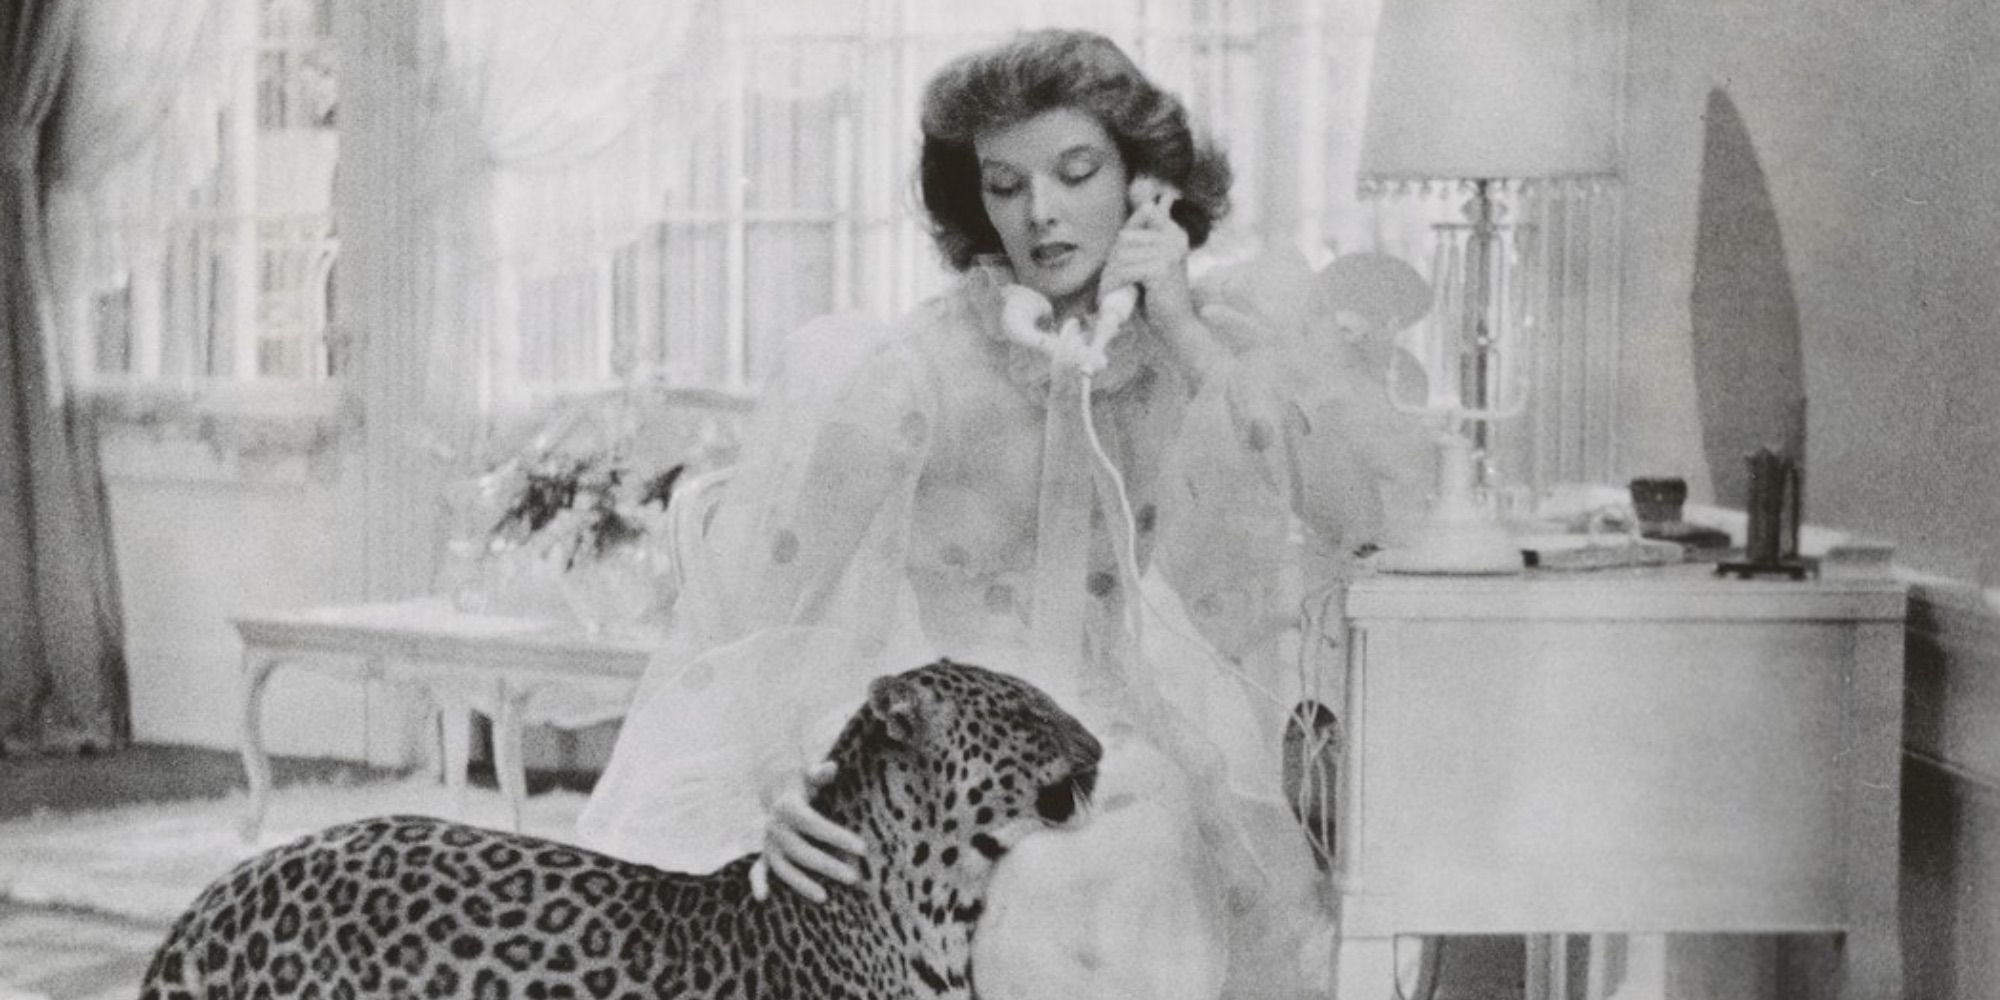 Susan Vance stroking her pet leopard while on the phone in Bringing Up Baby.